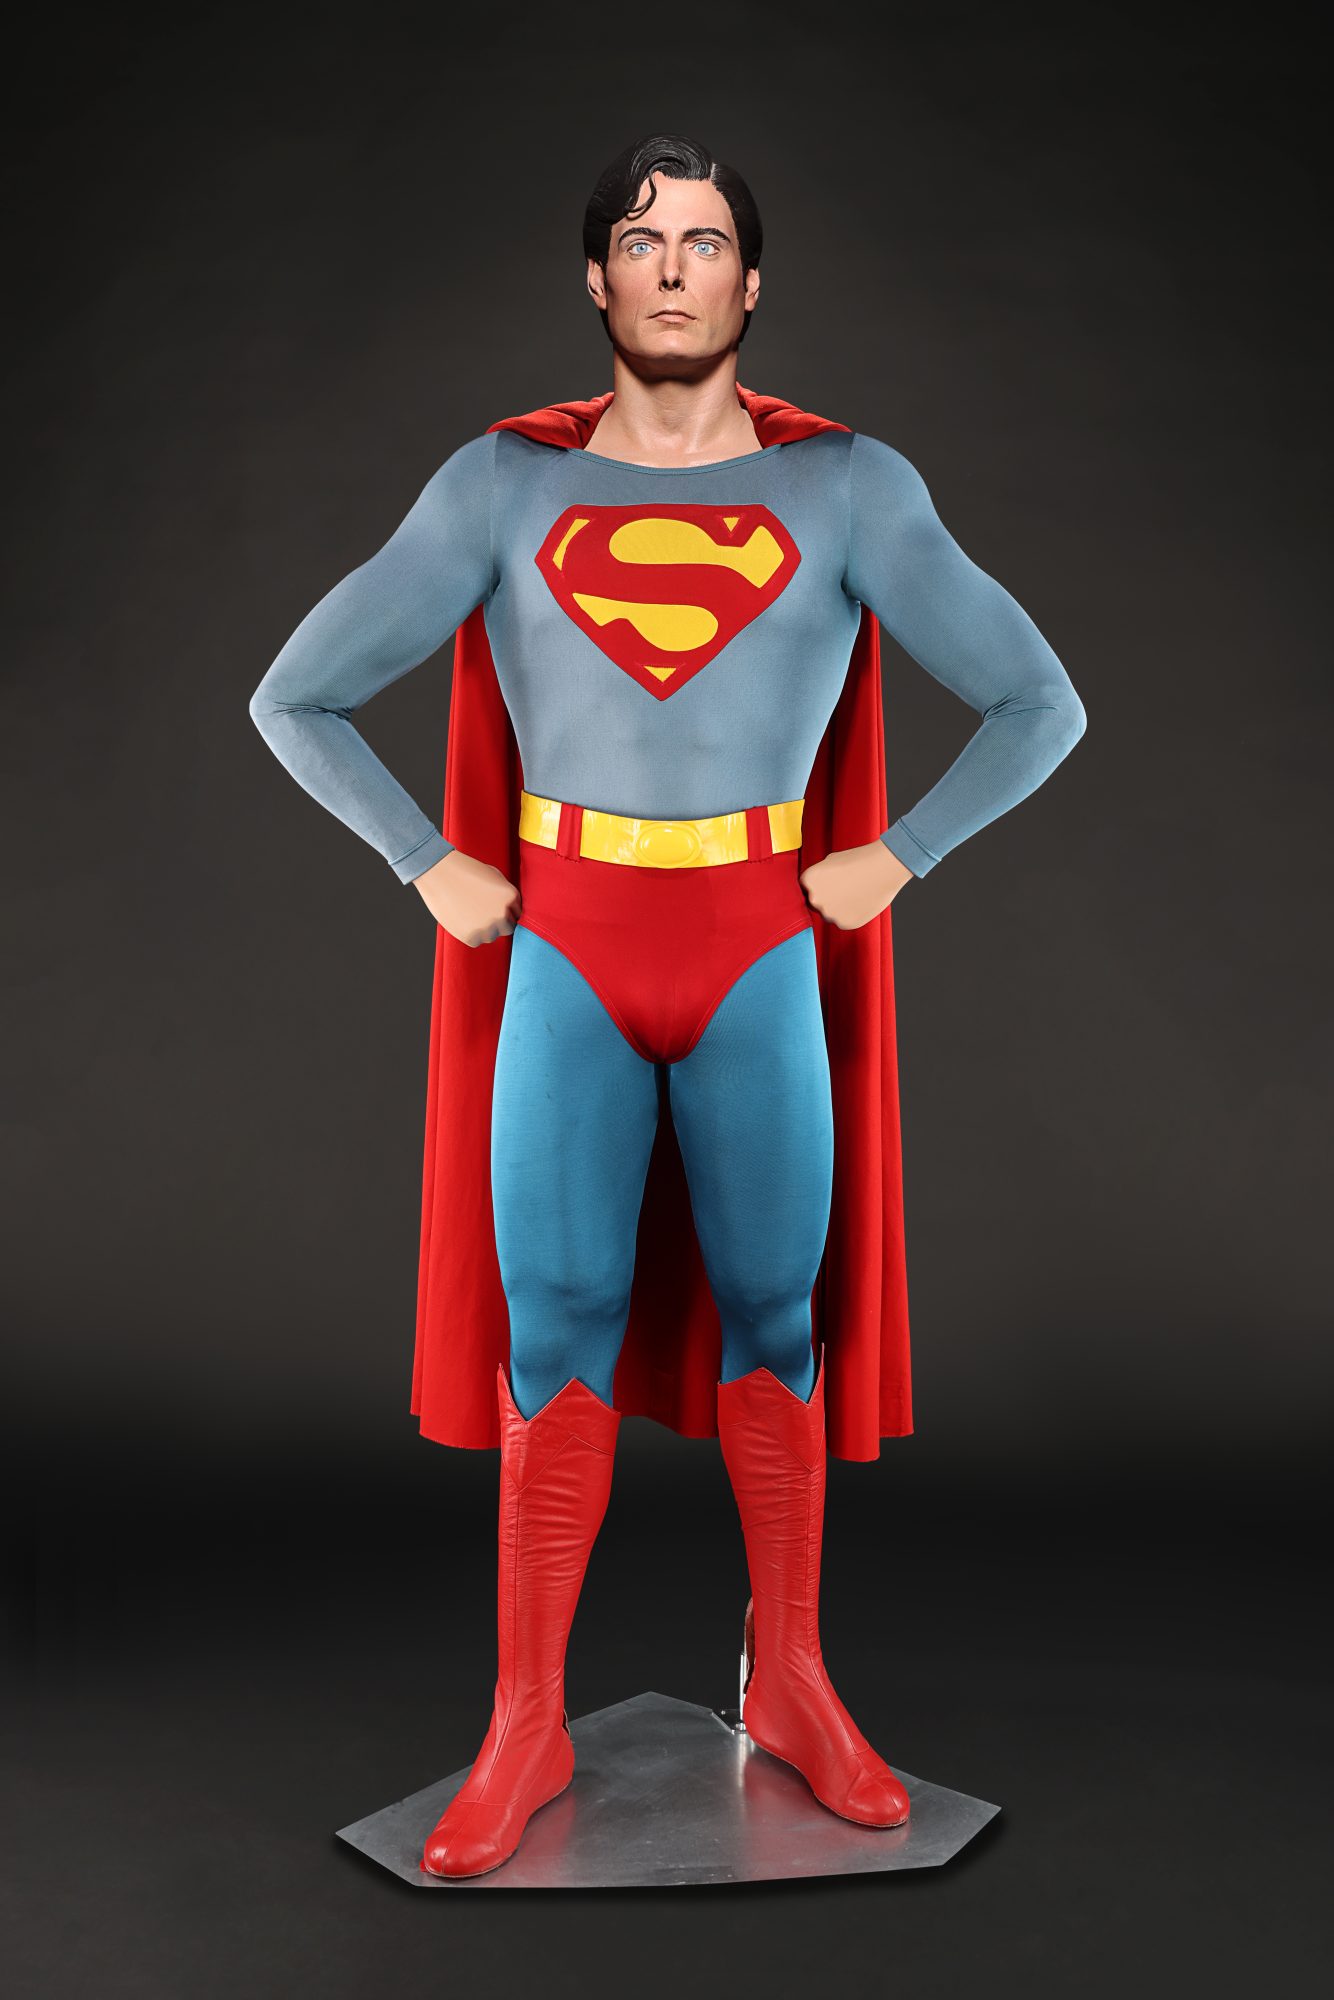 148257_Superman Christopher Reeve complete Costume_1